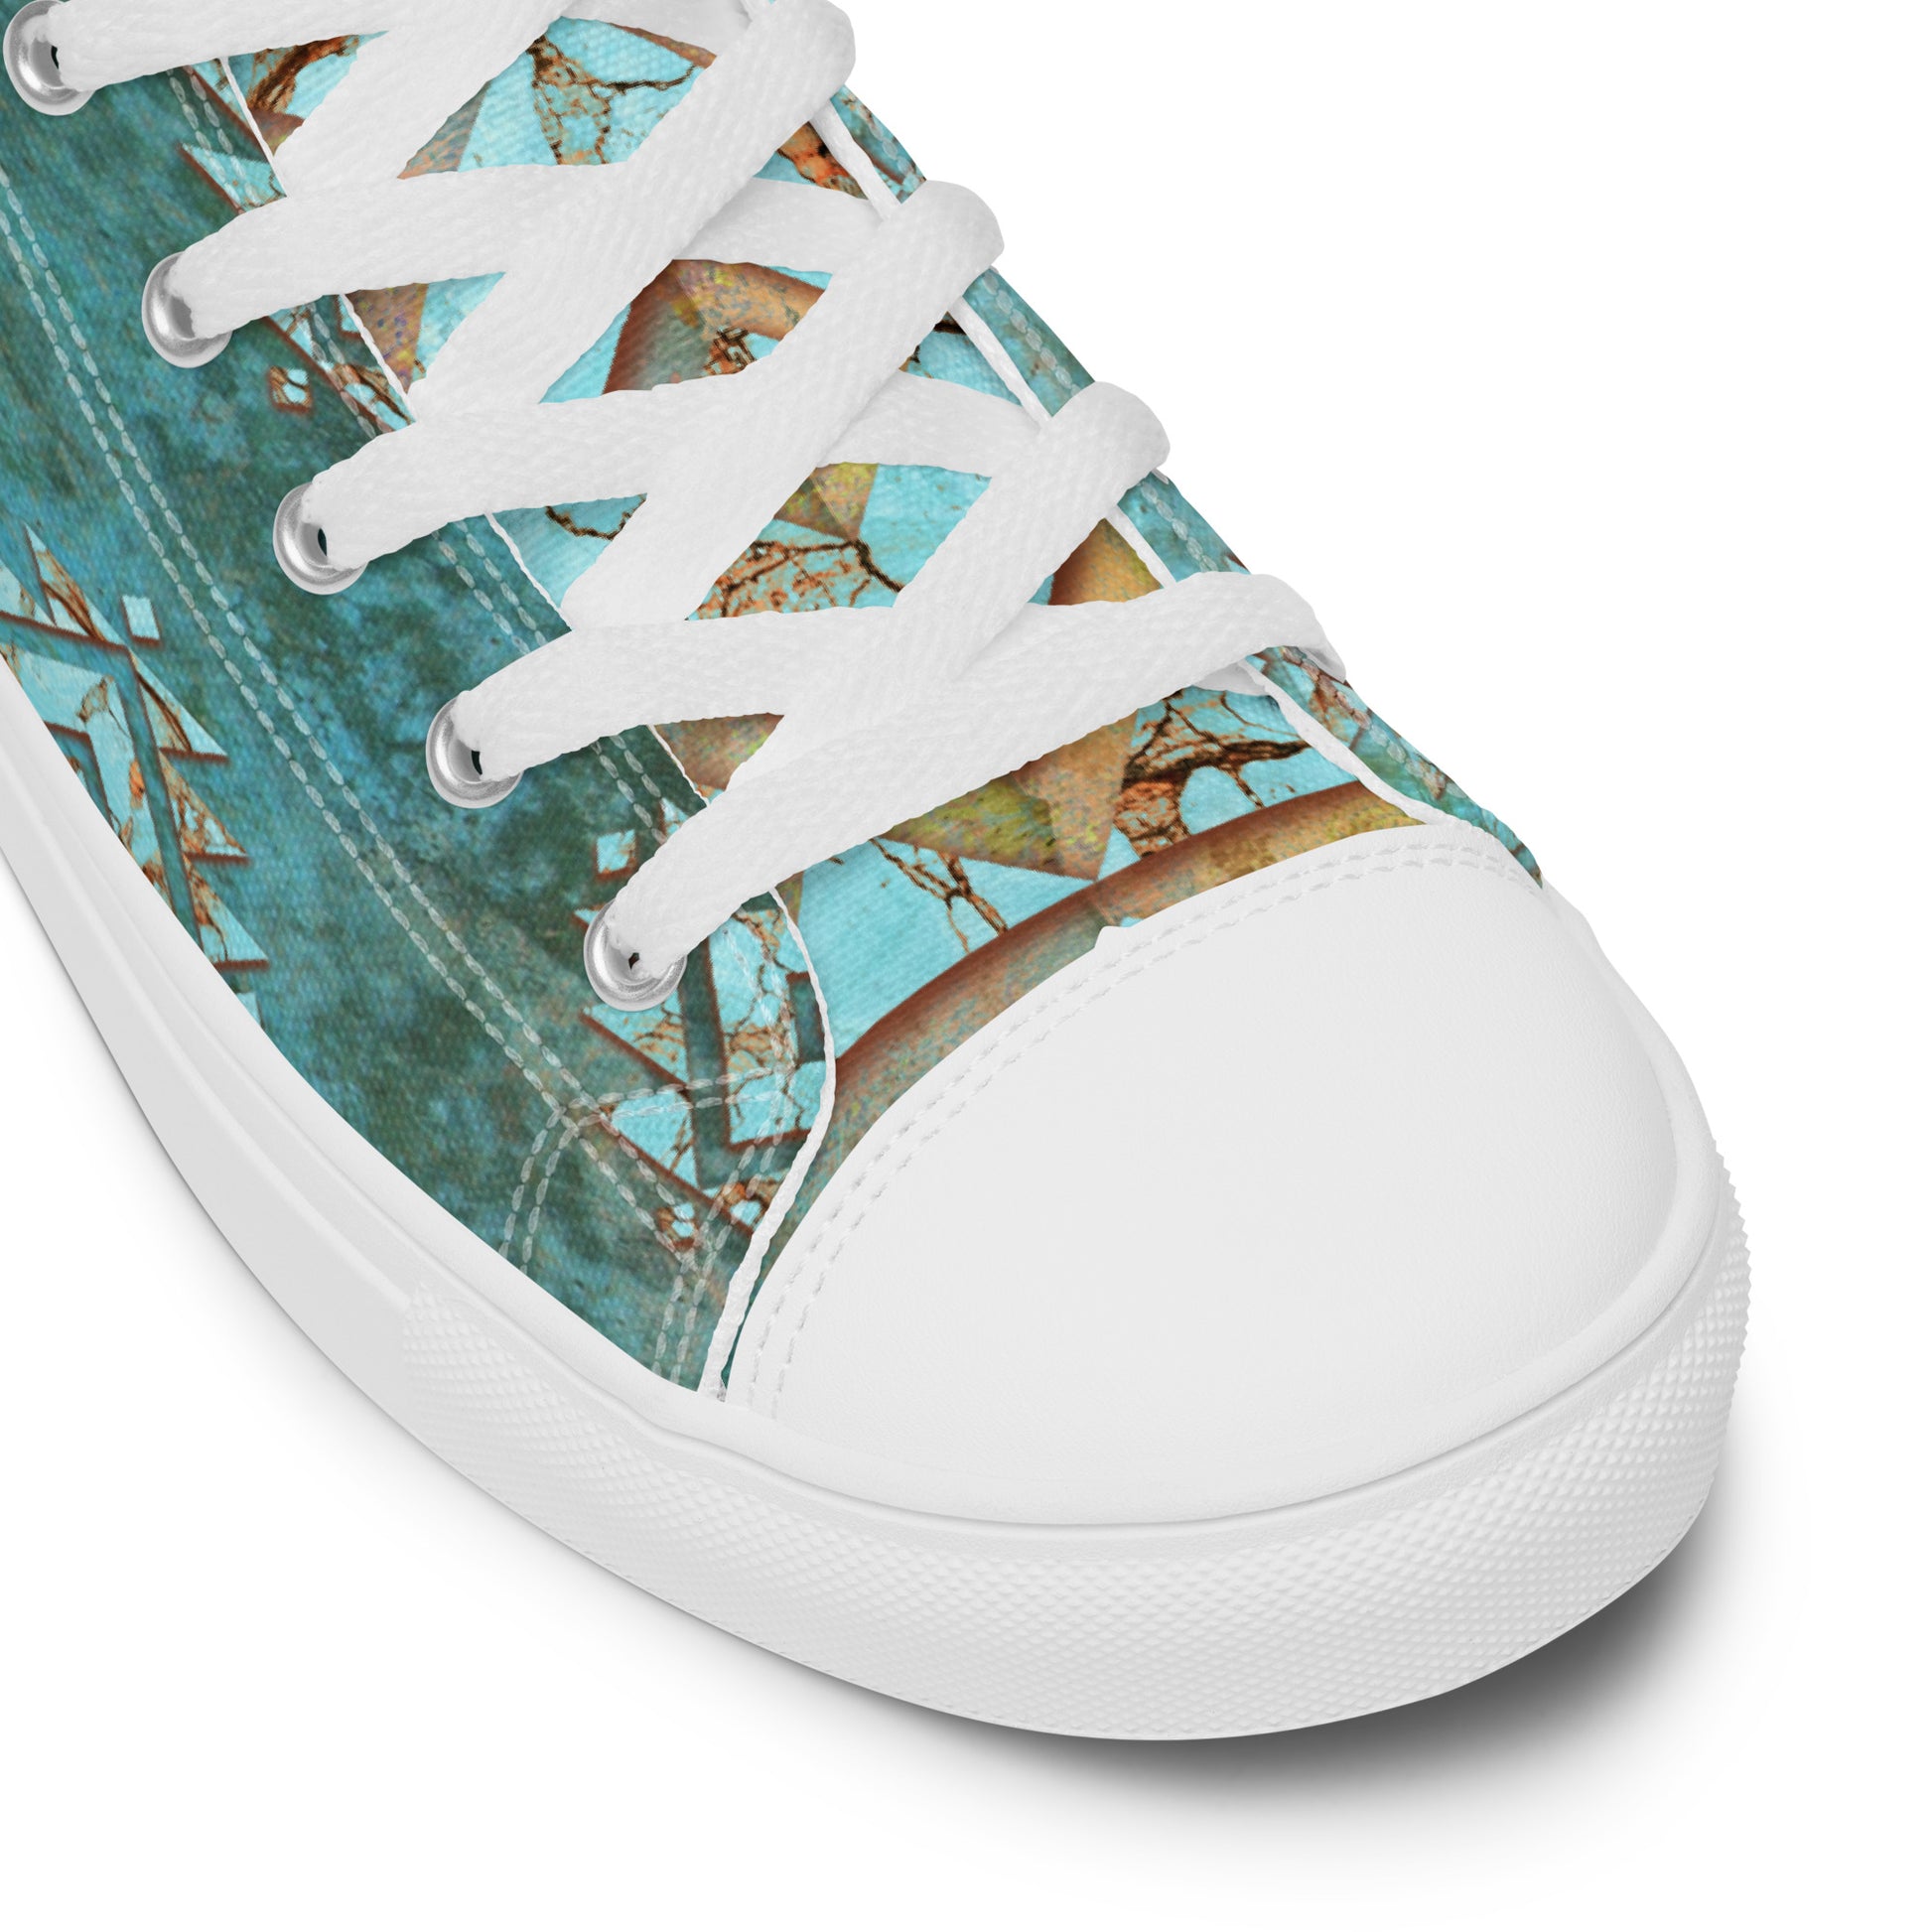 Turquoise Highland Cow Women’s high top canvas shoes - canvas, hairy cow, high top, high top shoes, highland, highland cow, hightop, turquoise, turquoise print -  - Baha Ranch Western Wear